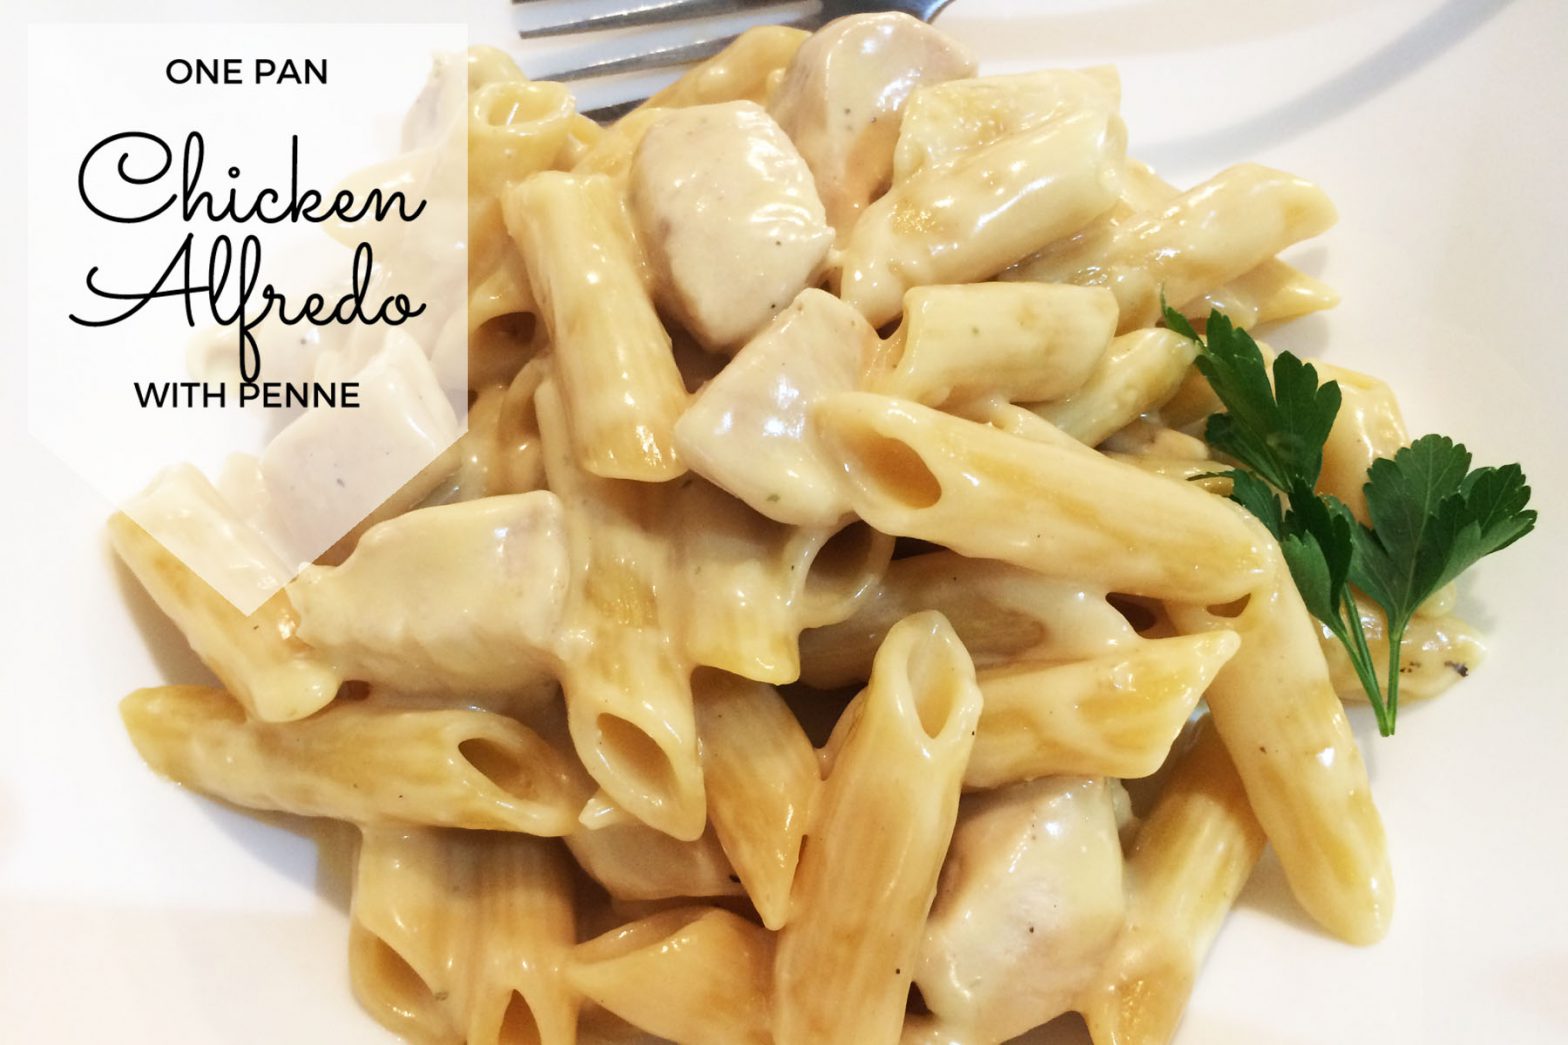 One Pan Chicken Alfredo with Penne Recipe - Mumslounge